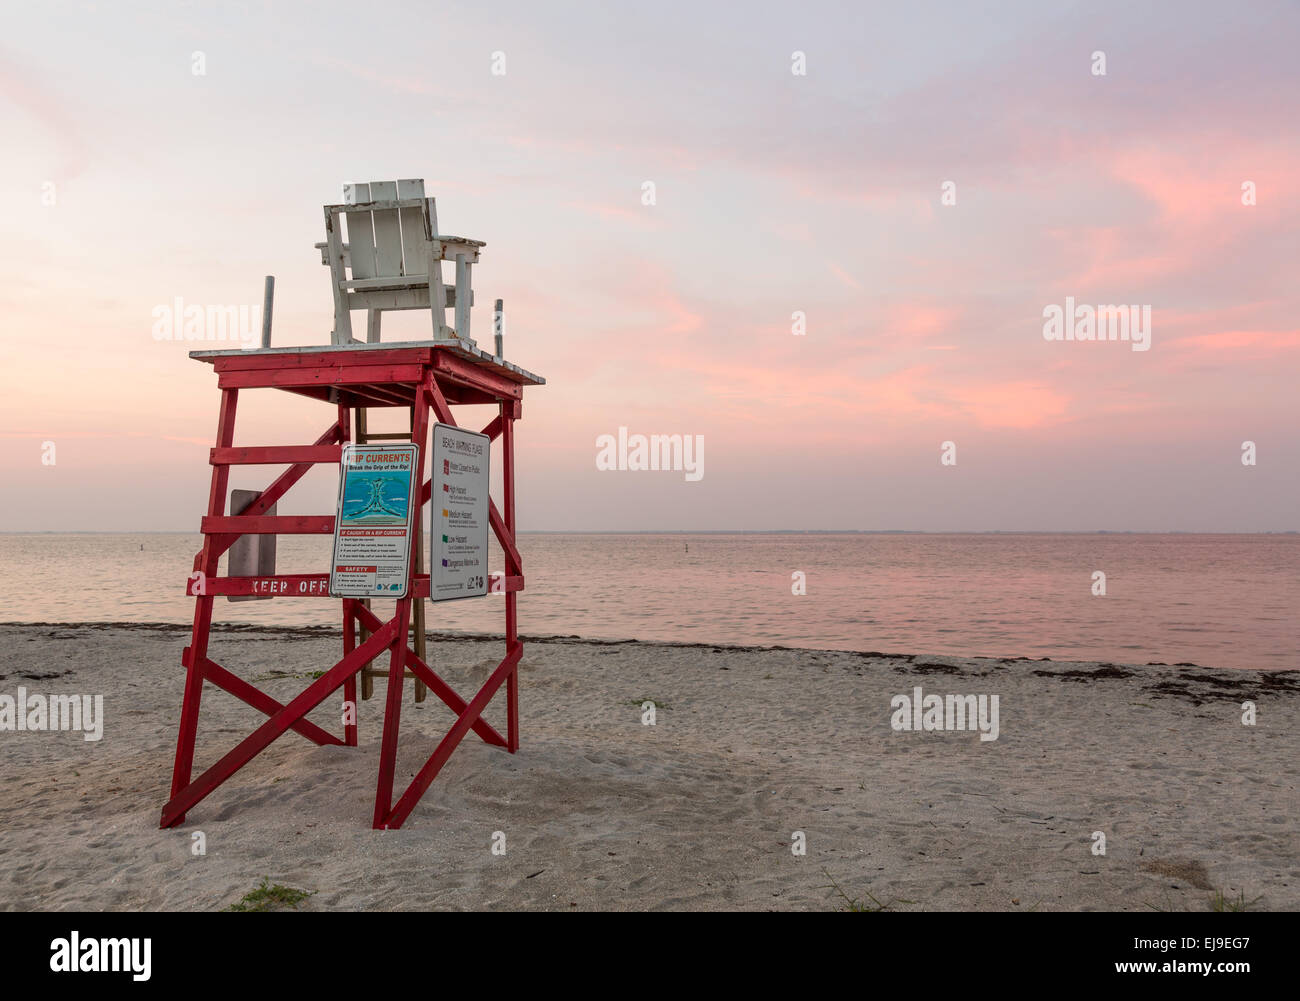 Lifeguard stand in Fort De Soto Florida Stock Photo